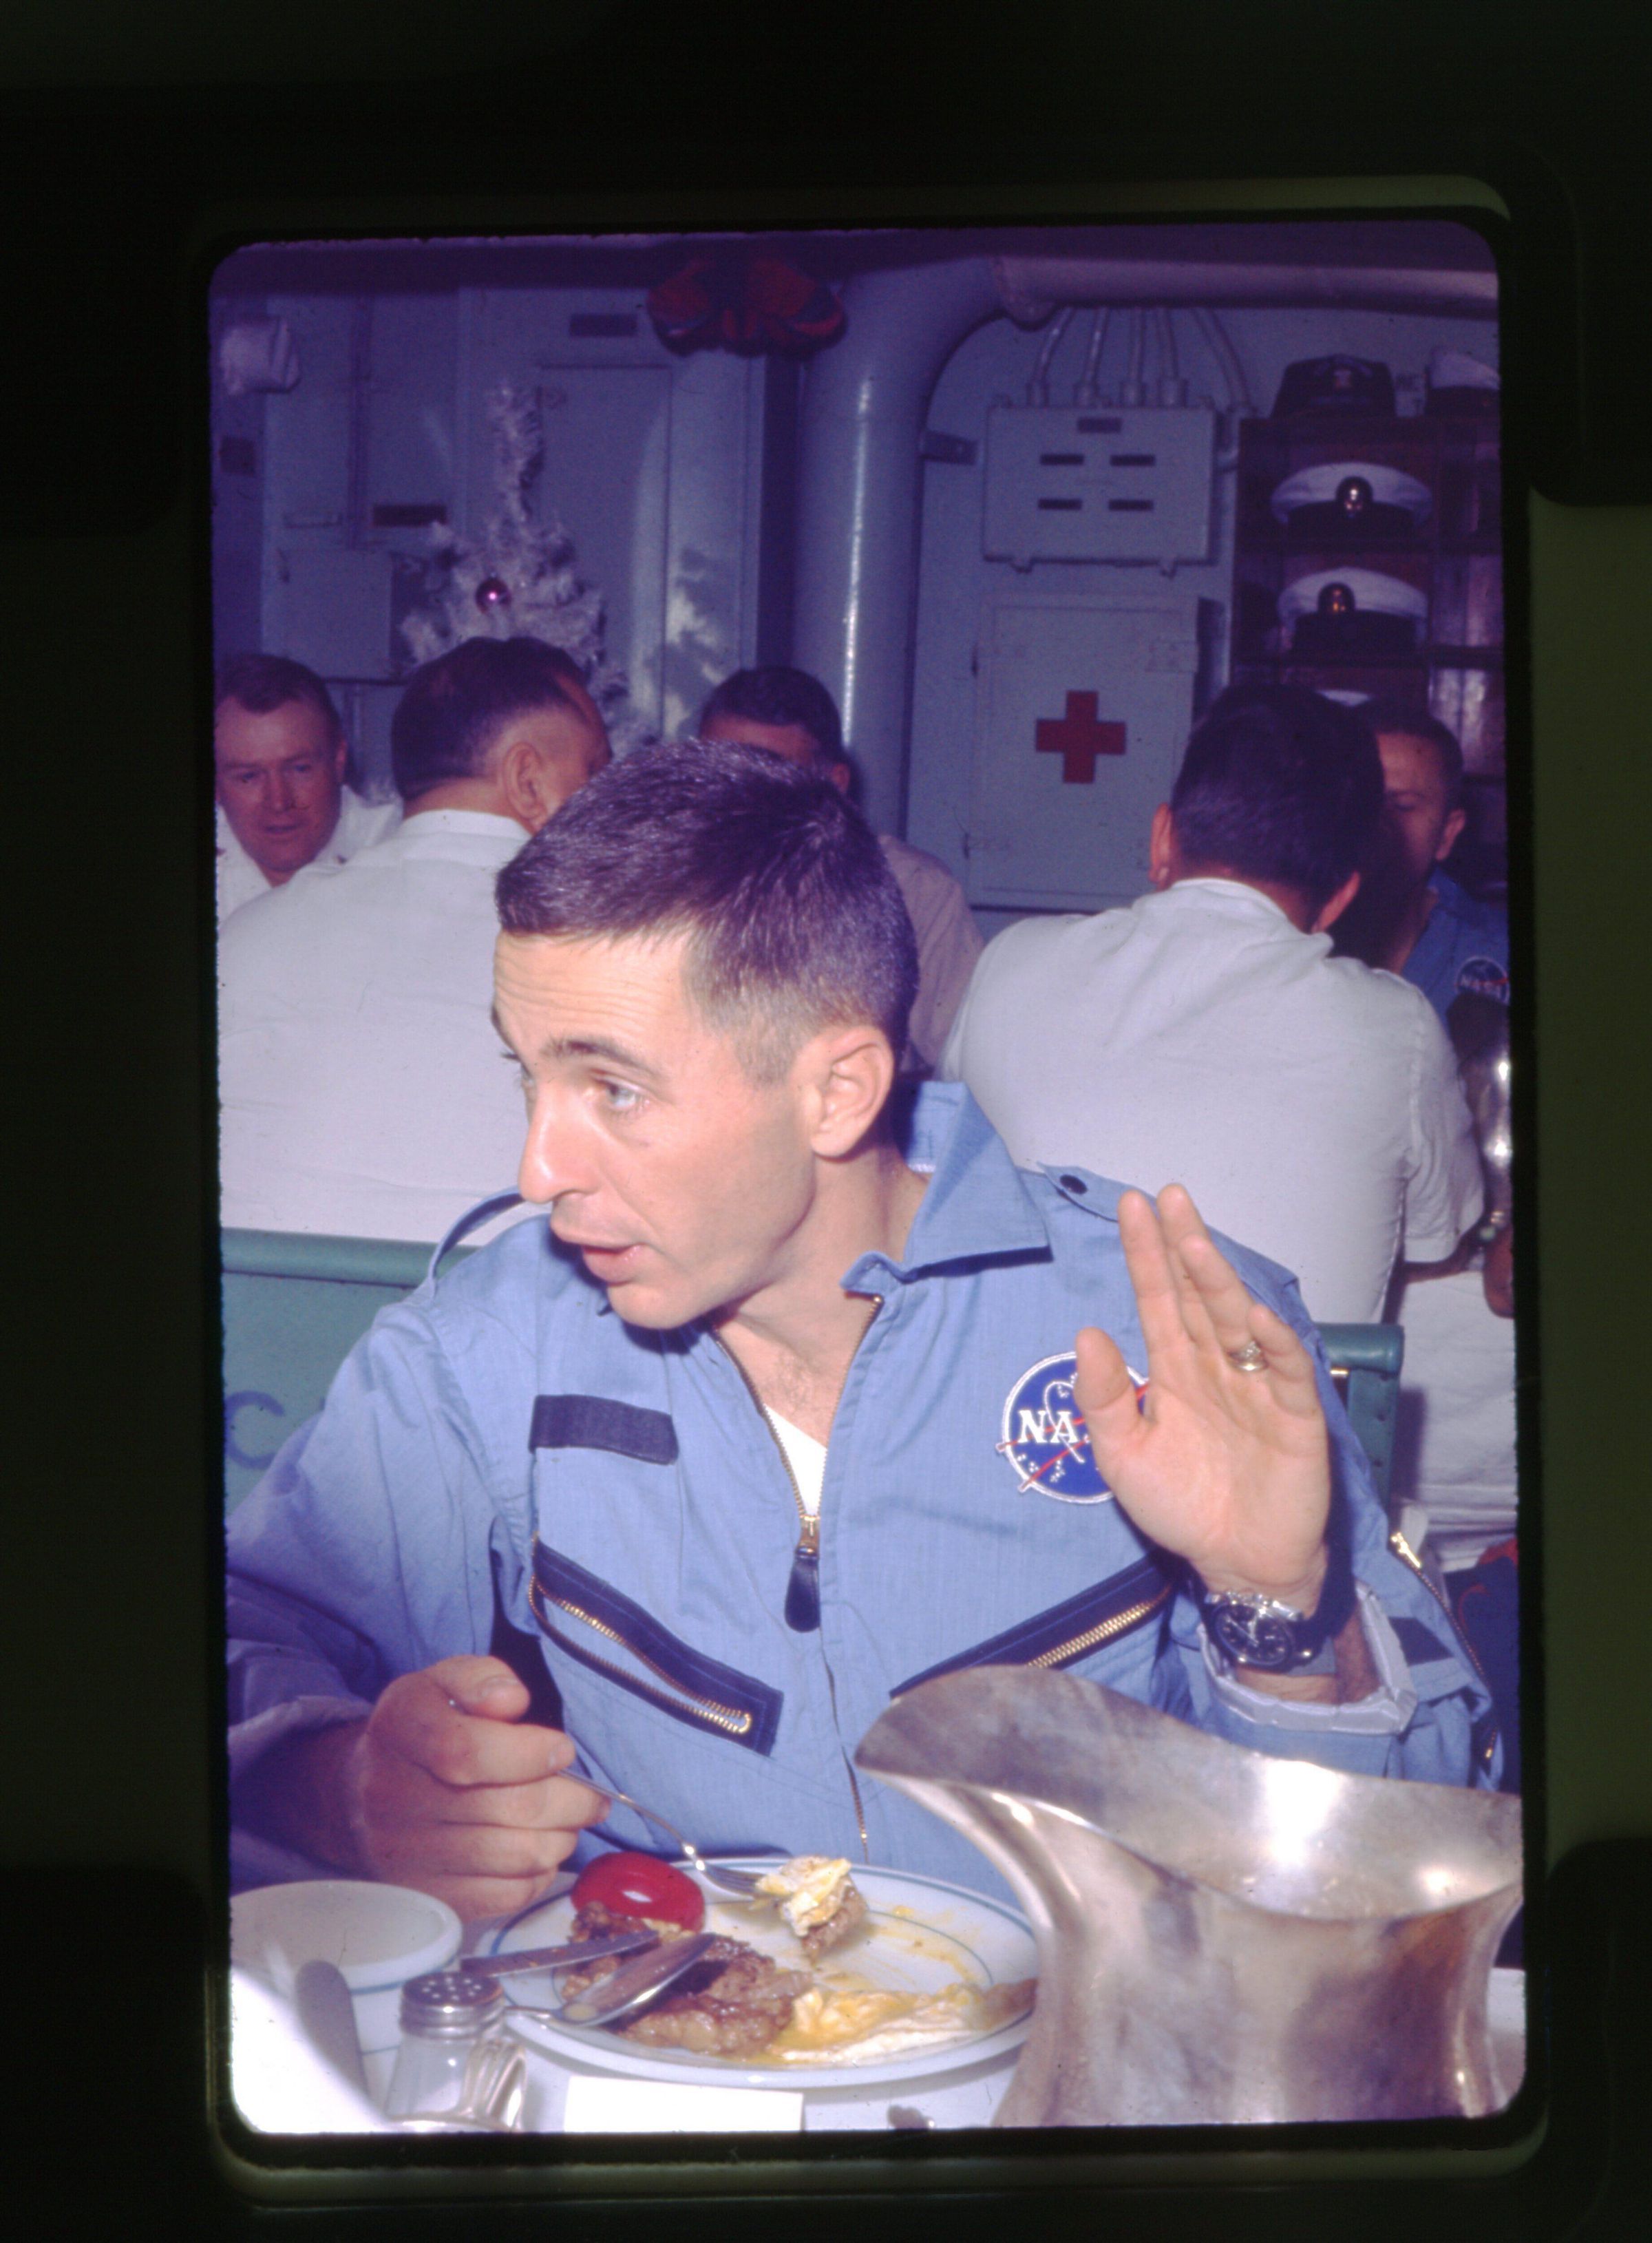 Primary Image of Astronaut William Anders Enjoys a Meal Aboard The USS Yorktown (CVS-10)